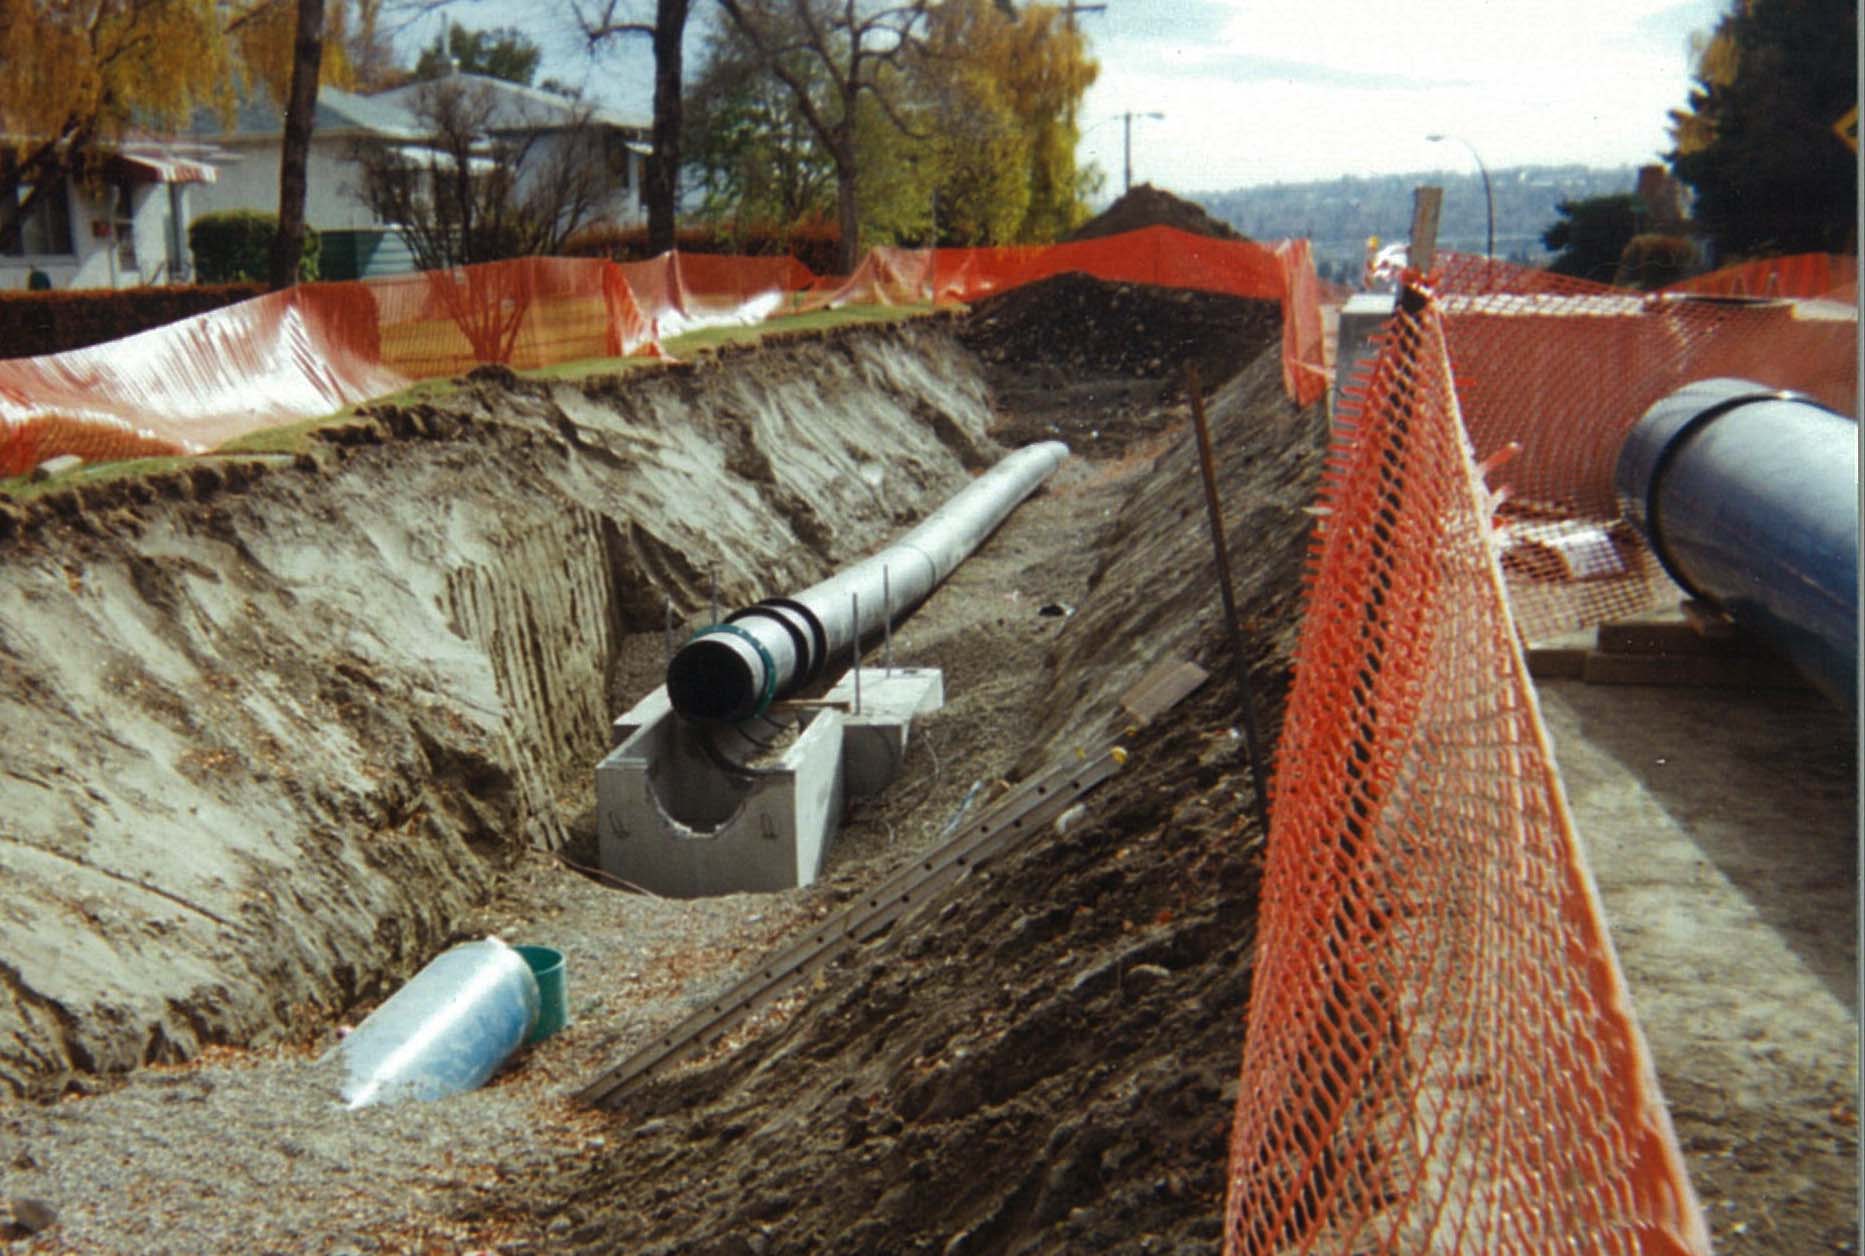 CRP Products, HDPE, pipe. City of Calgary